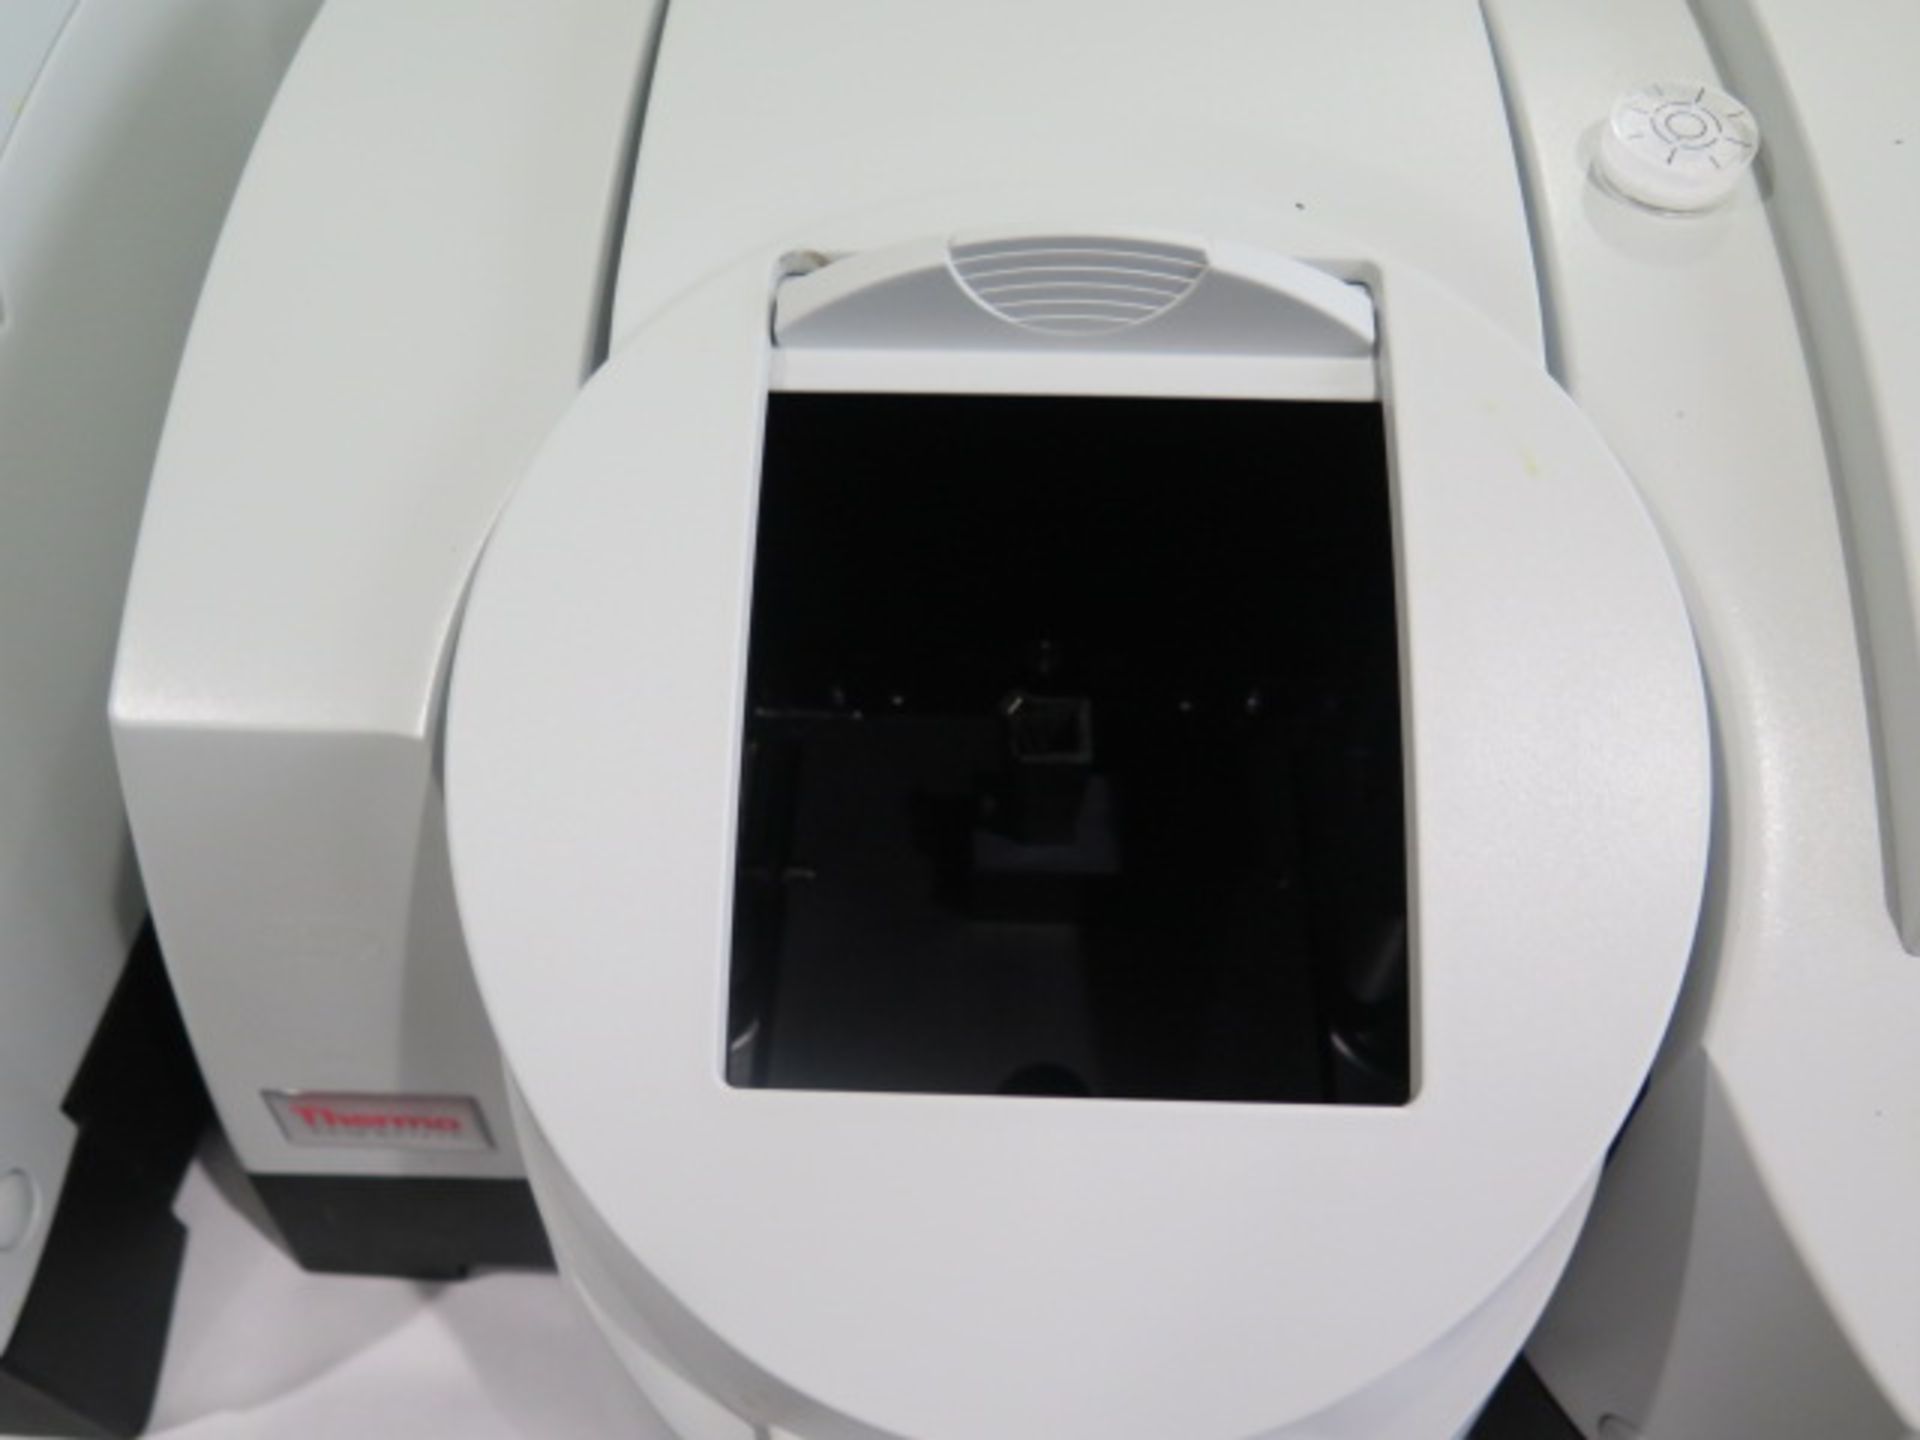 Thermo Scientific Evolution 300 UV-VIS Spectrophotometer s/n EVOU308001 (SOLD AS-IS - NO WARRANTY) - Image 3 of 8